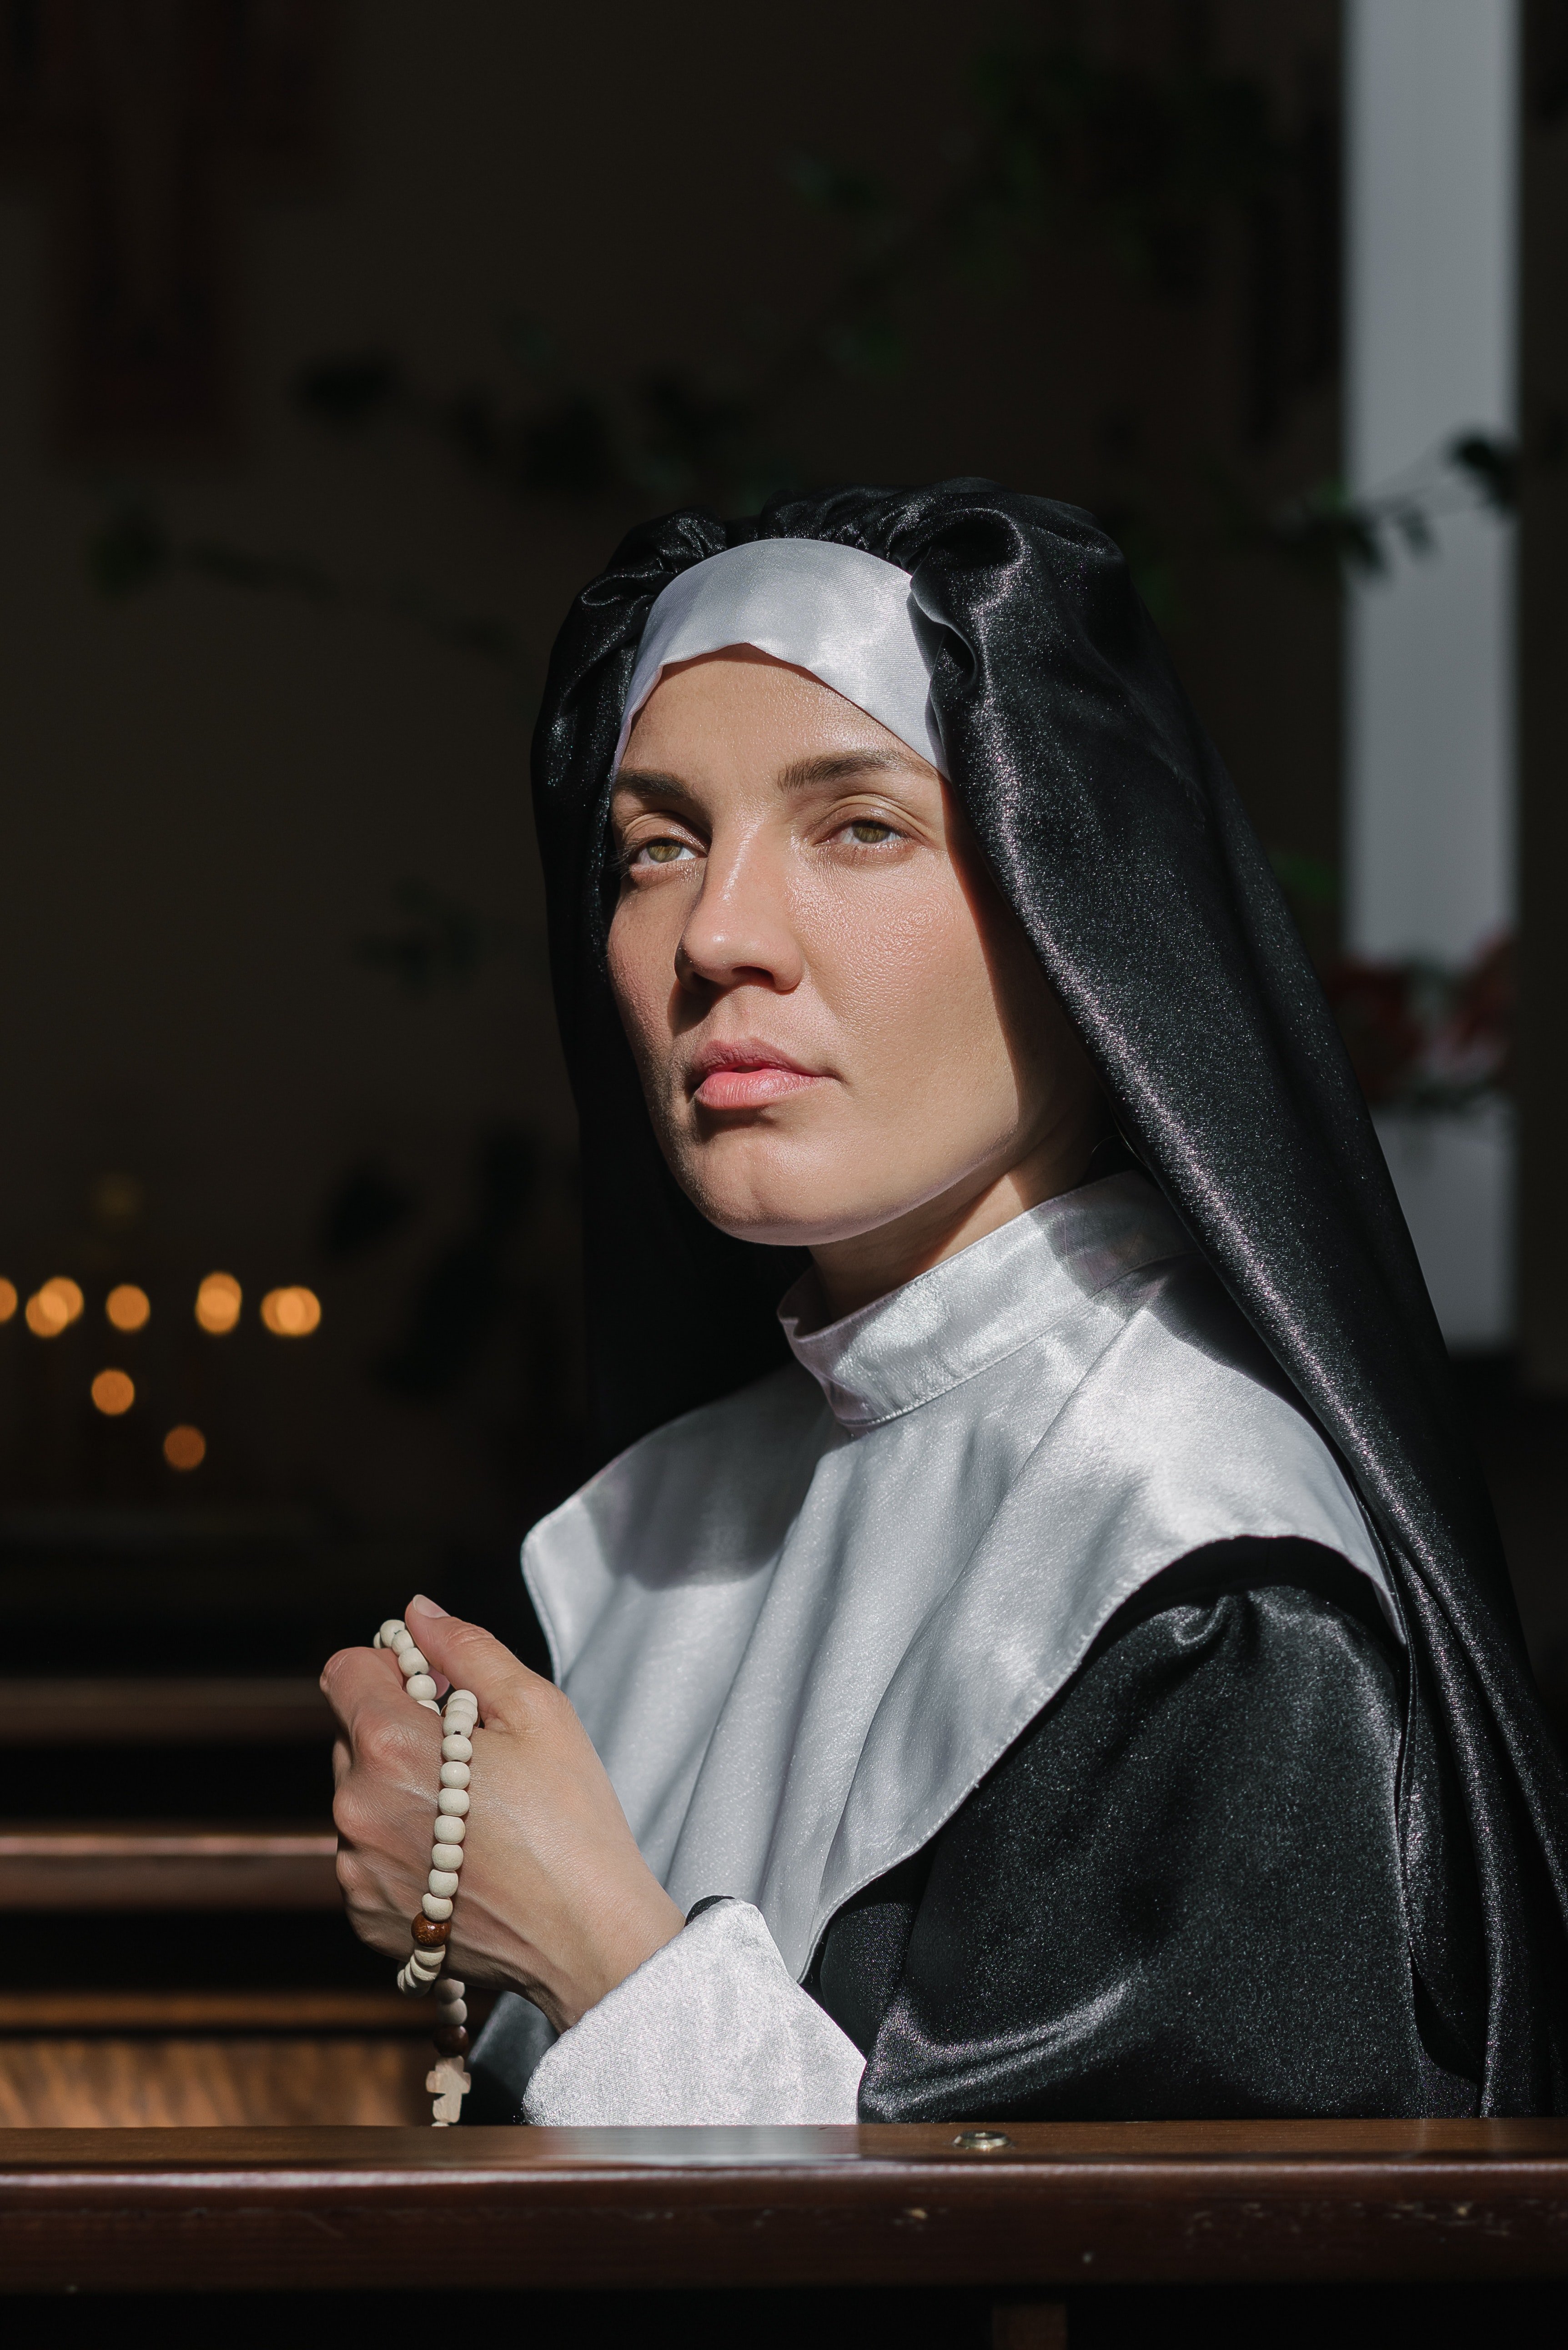 Sister Martha revealed Paige's heartbreaking story. | Source: Pexels